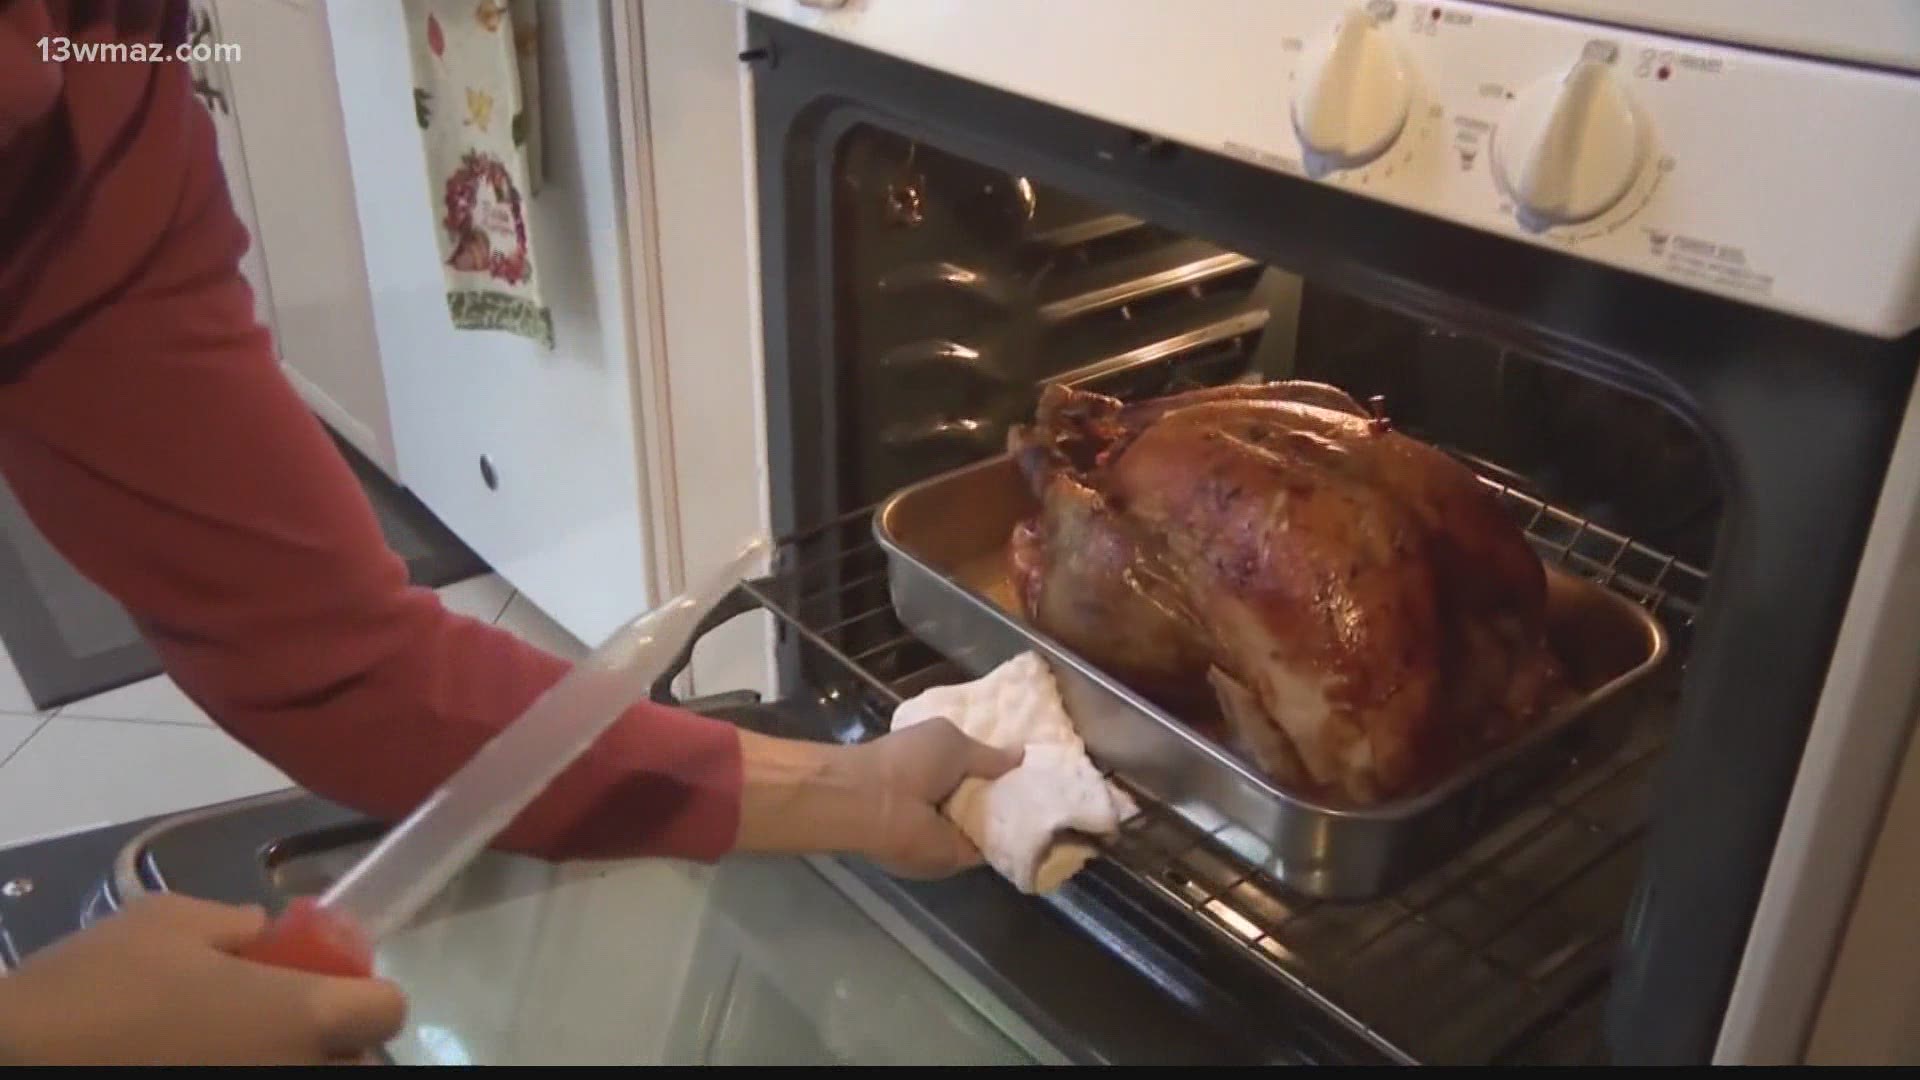 If you have the cooking responsibility this year, you can be prepared for making your first Thanksgiving dinner